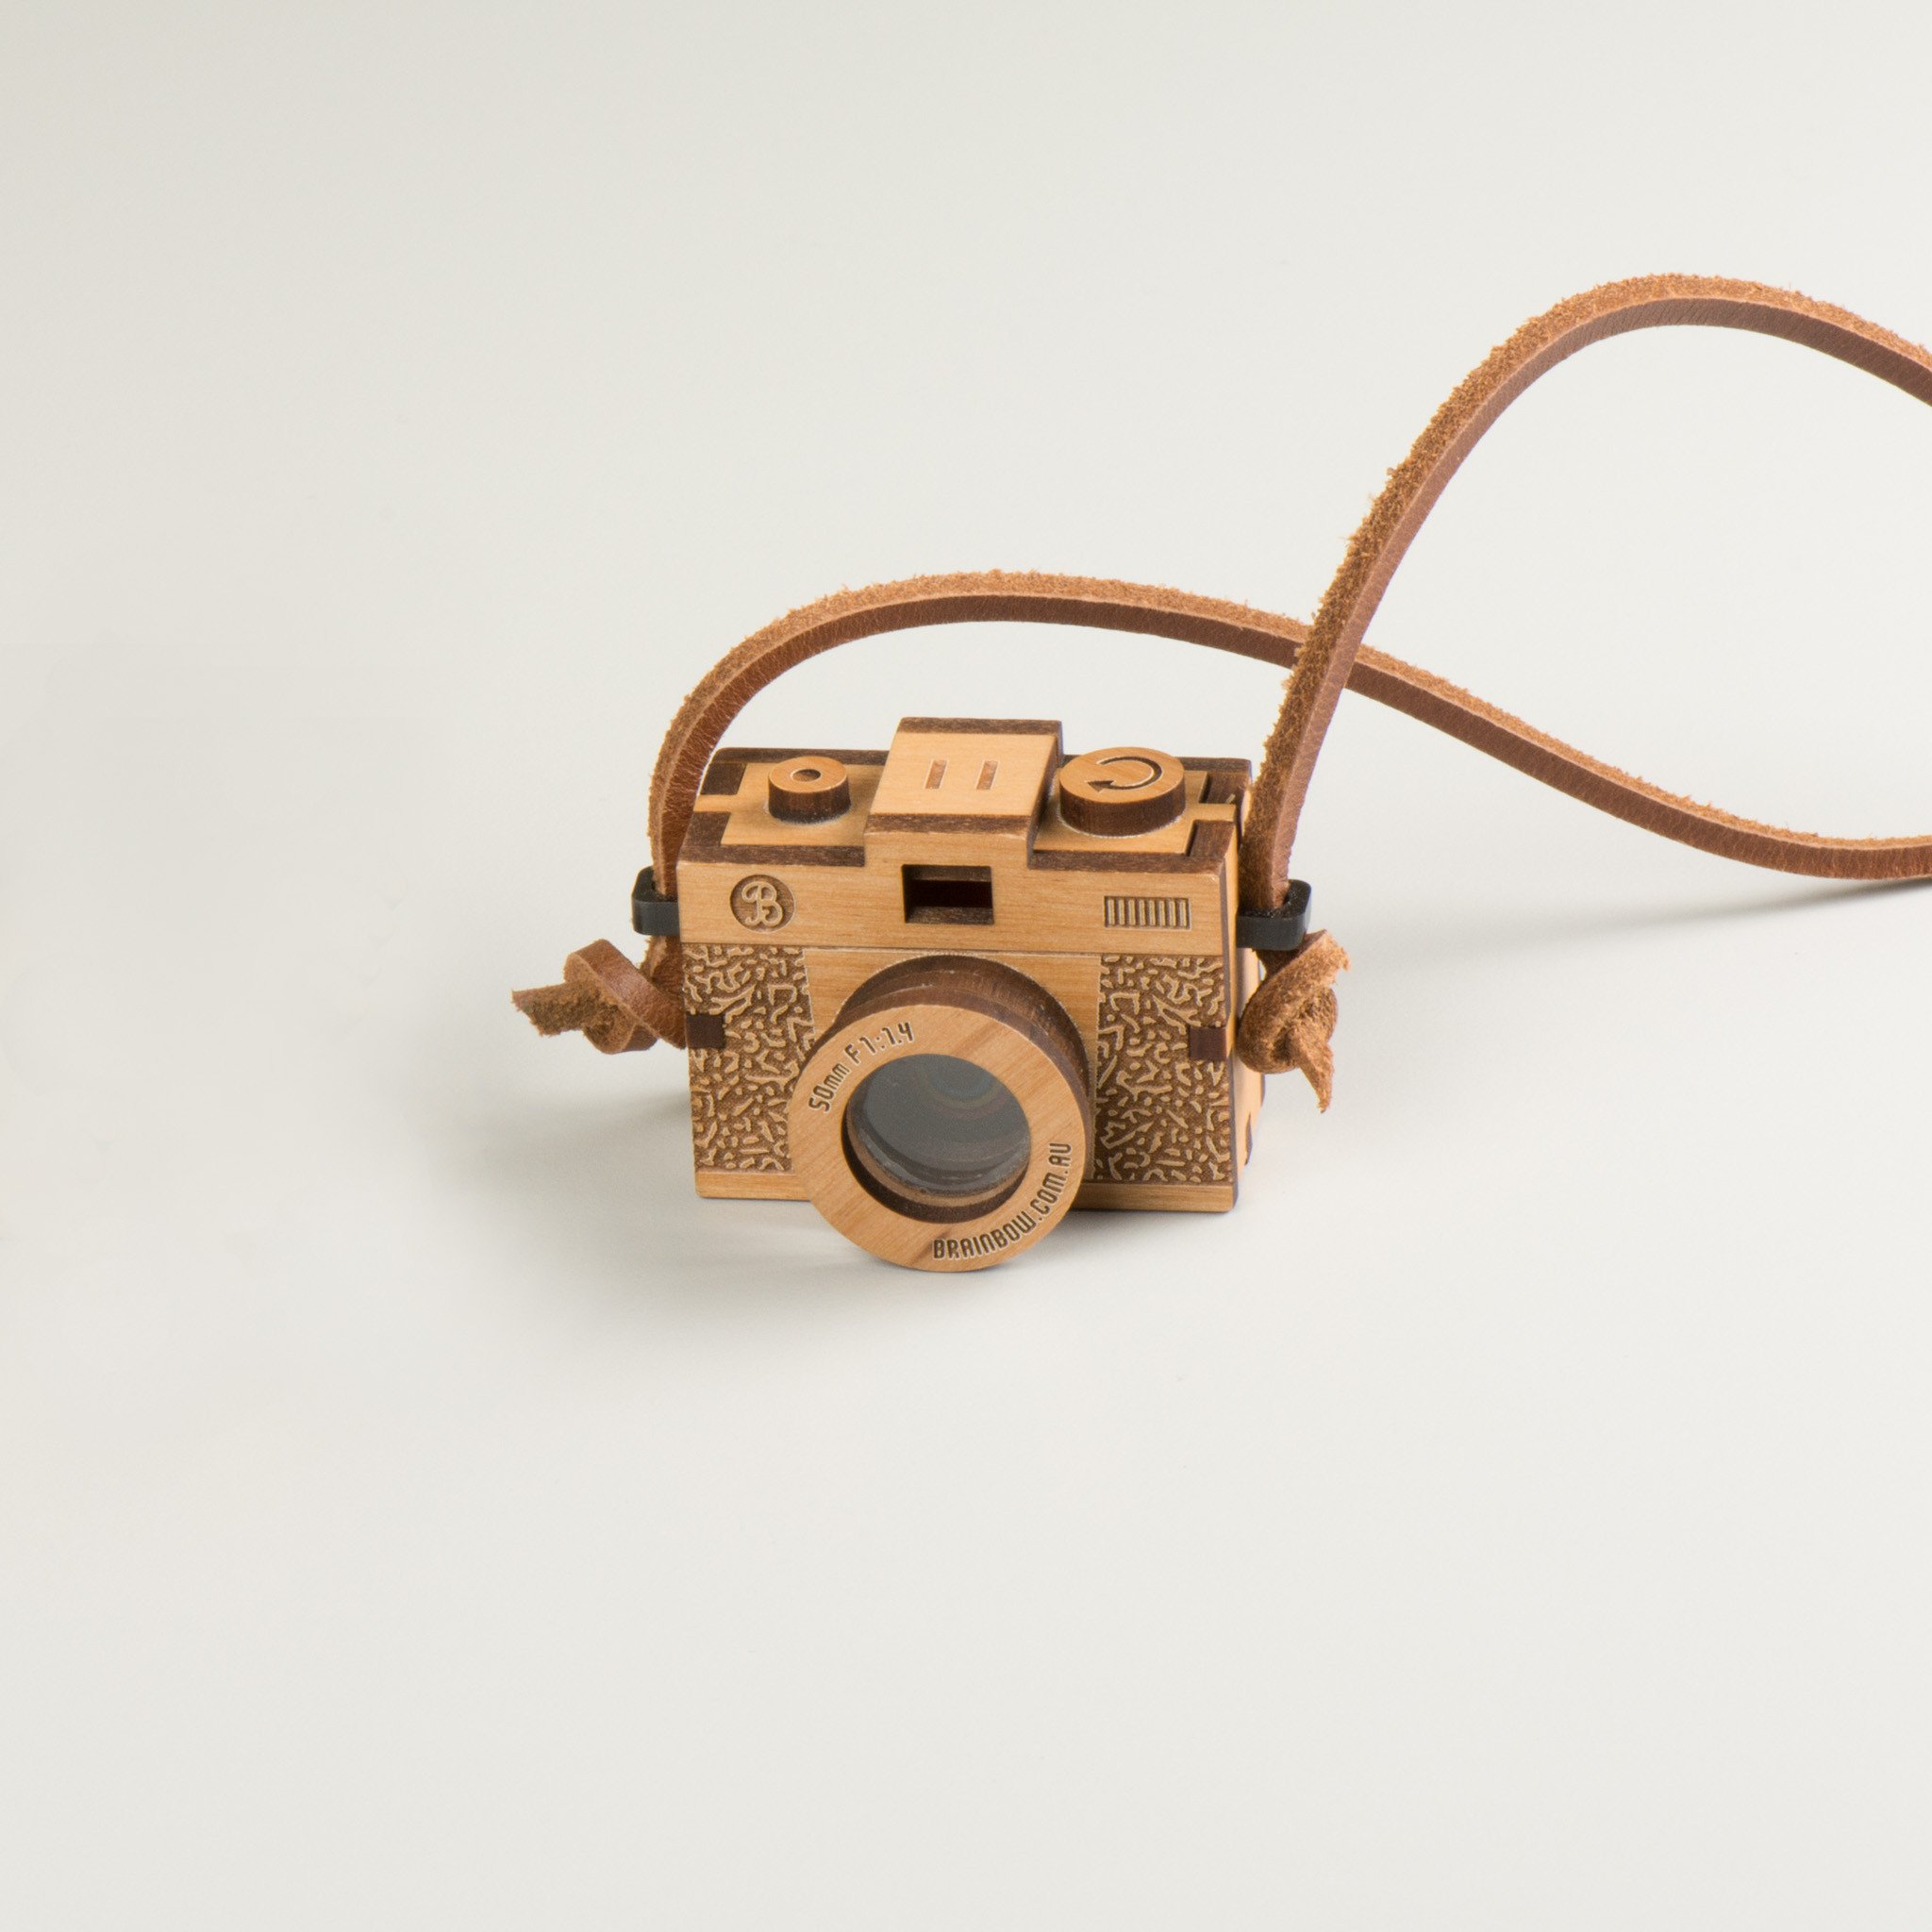 Brainbow 3D Wooden Camera Necklace - Arlette Gold